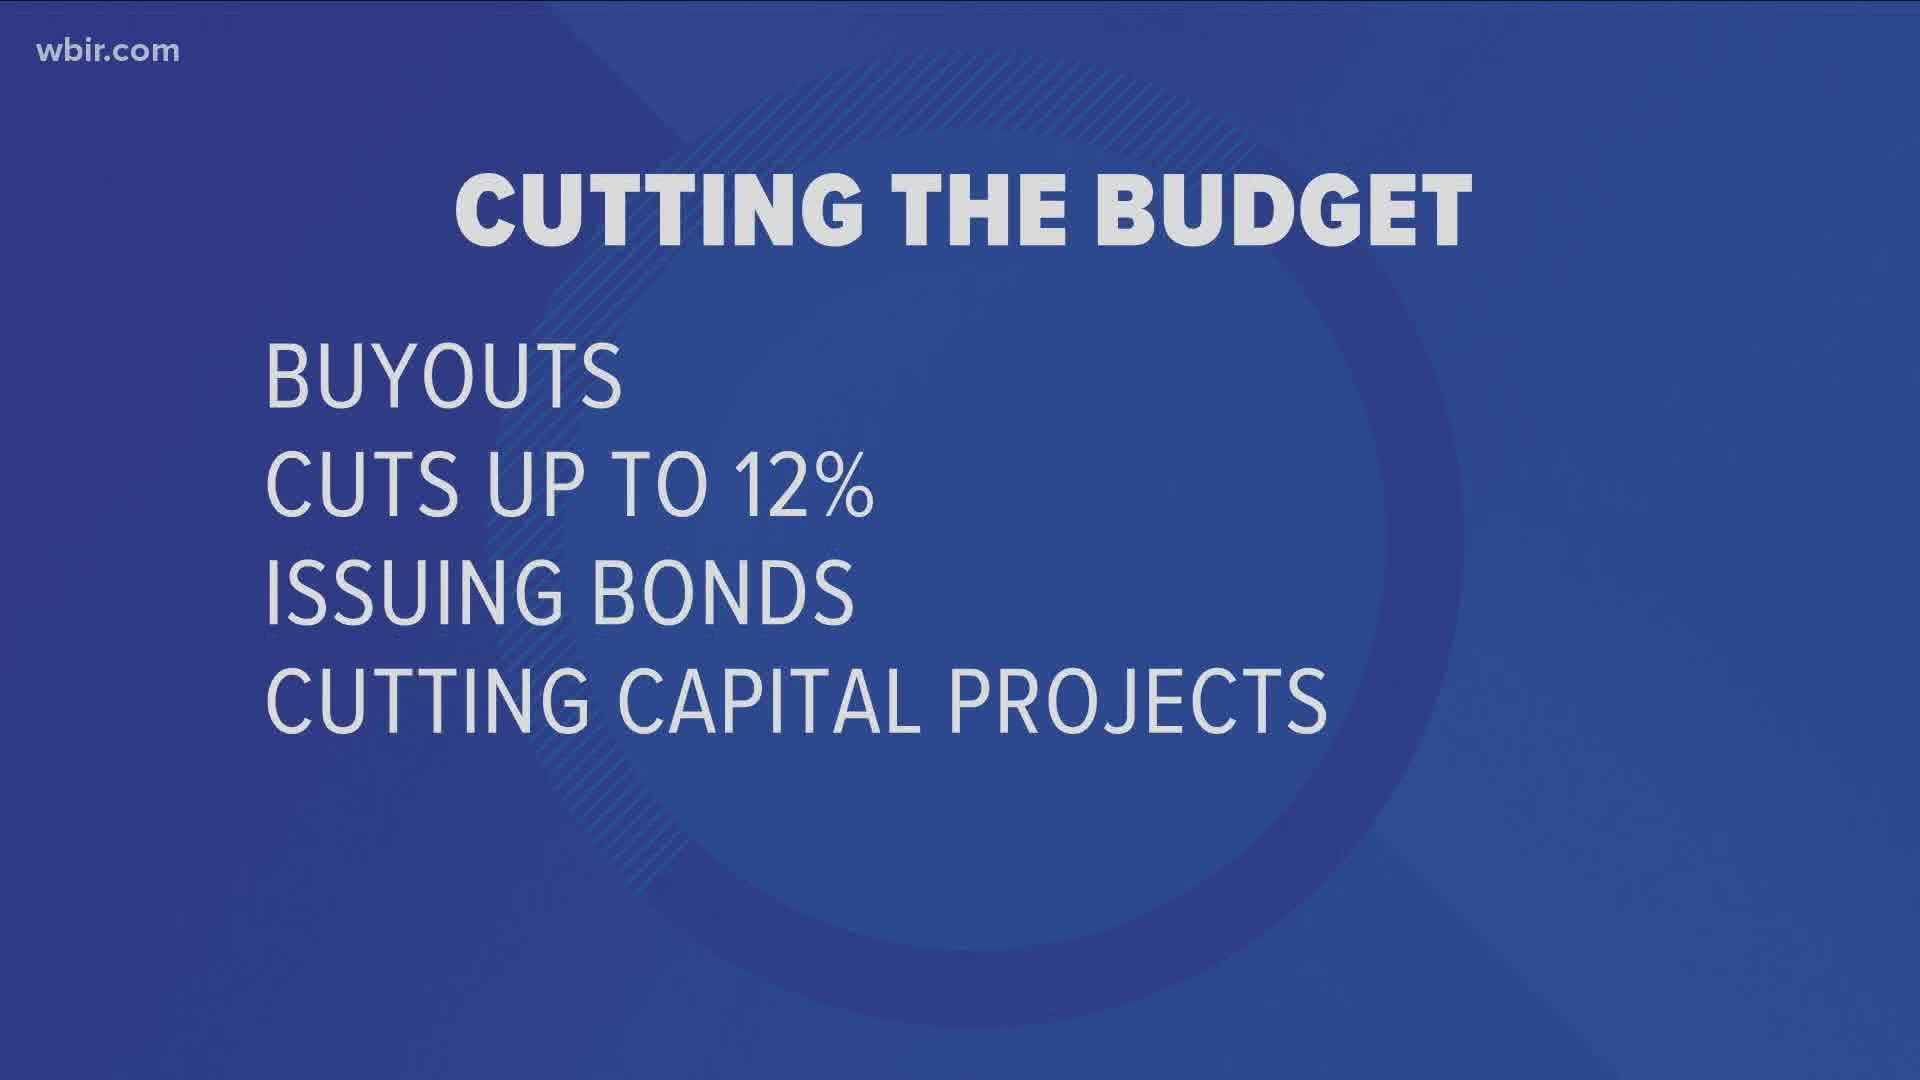 Gov. Bill Lee's administration released his revised budget for the coming year. It includes buyouts and elimination of some capital projects.